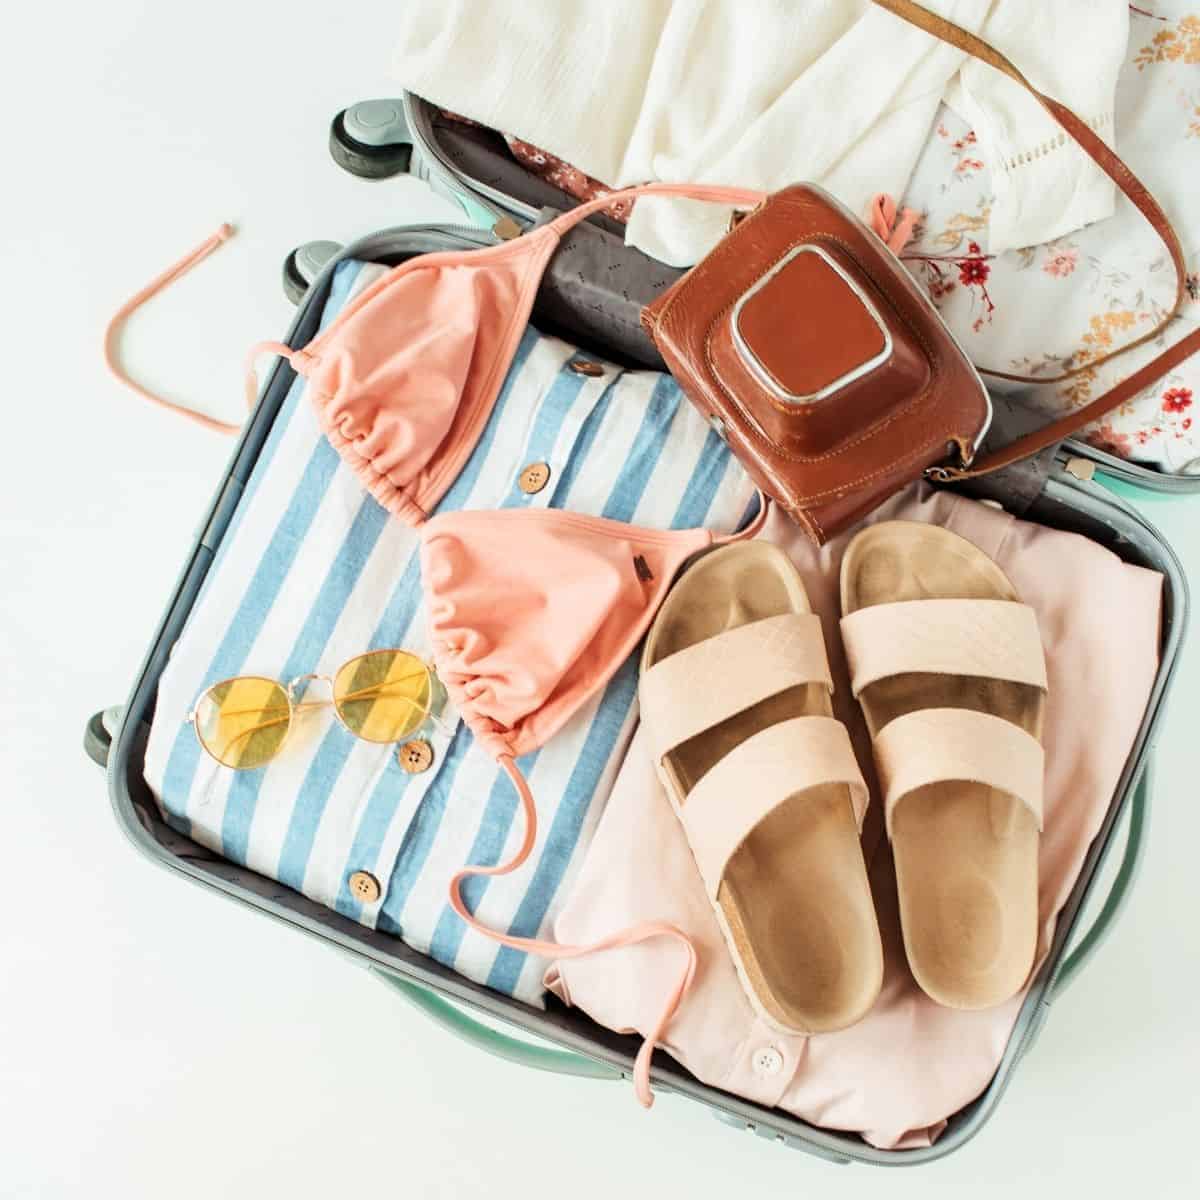 bag sunglasses sandals shown as traveling essentials for women.